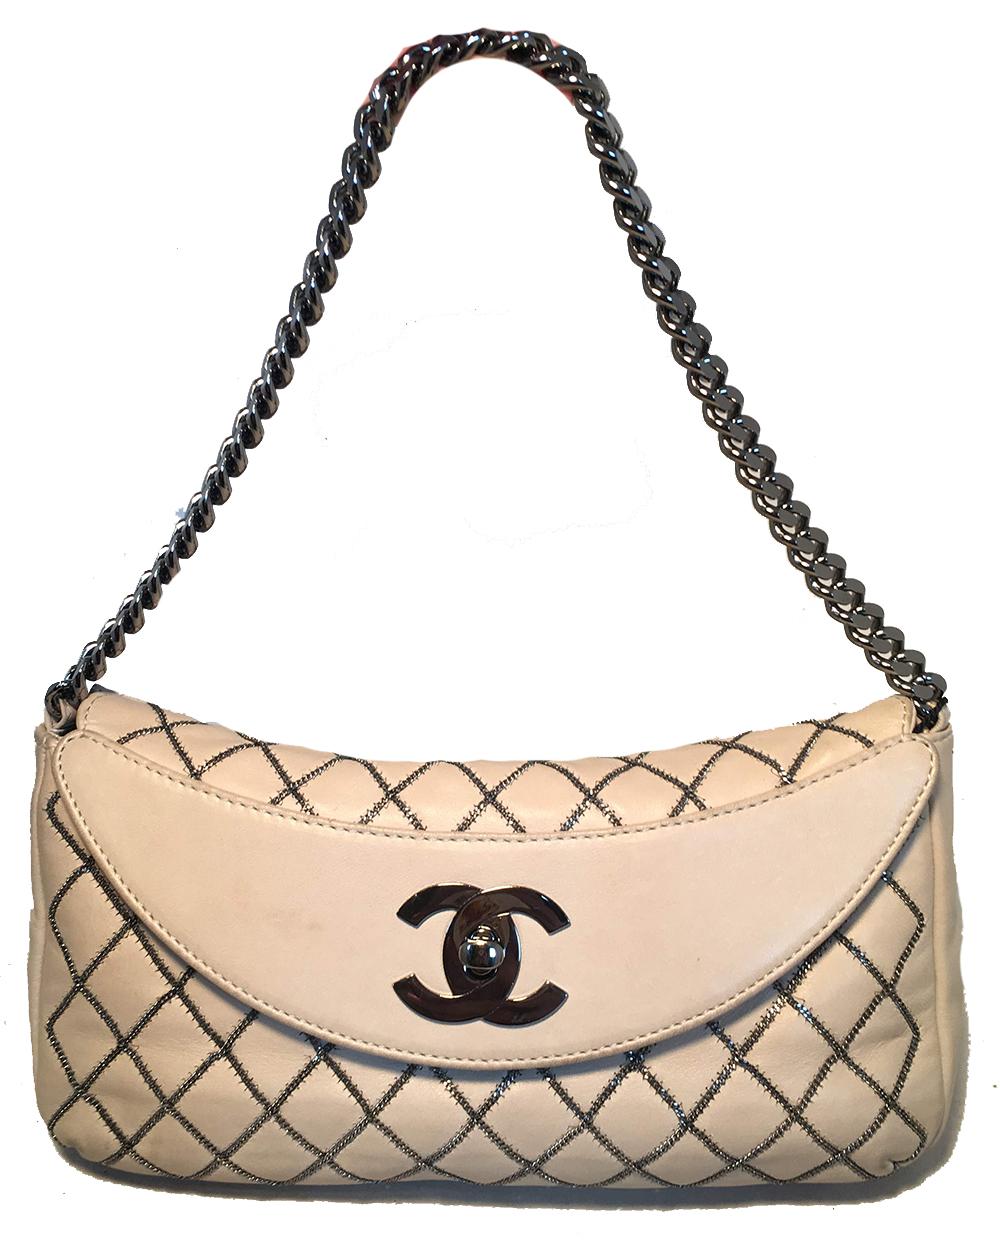 Chanel Beige Leather Gunmetal Chain Quilted Classic Flap Shoulder Bag in very good condition. Soft beige quilted lambskin leather exterior trimmed with gunmetal hardware and delicate chain quilted signature diamond pattern along front side. Twisting